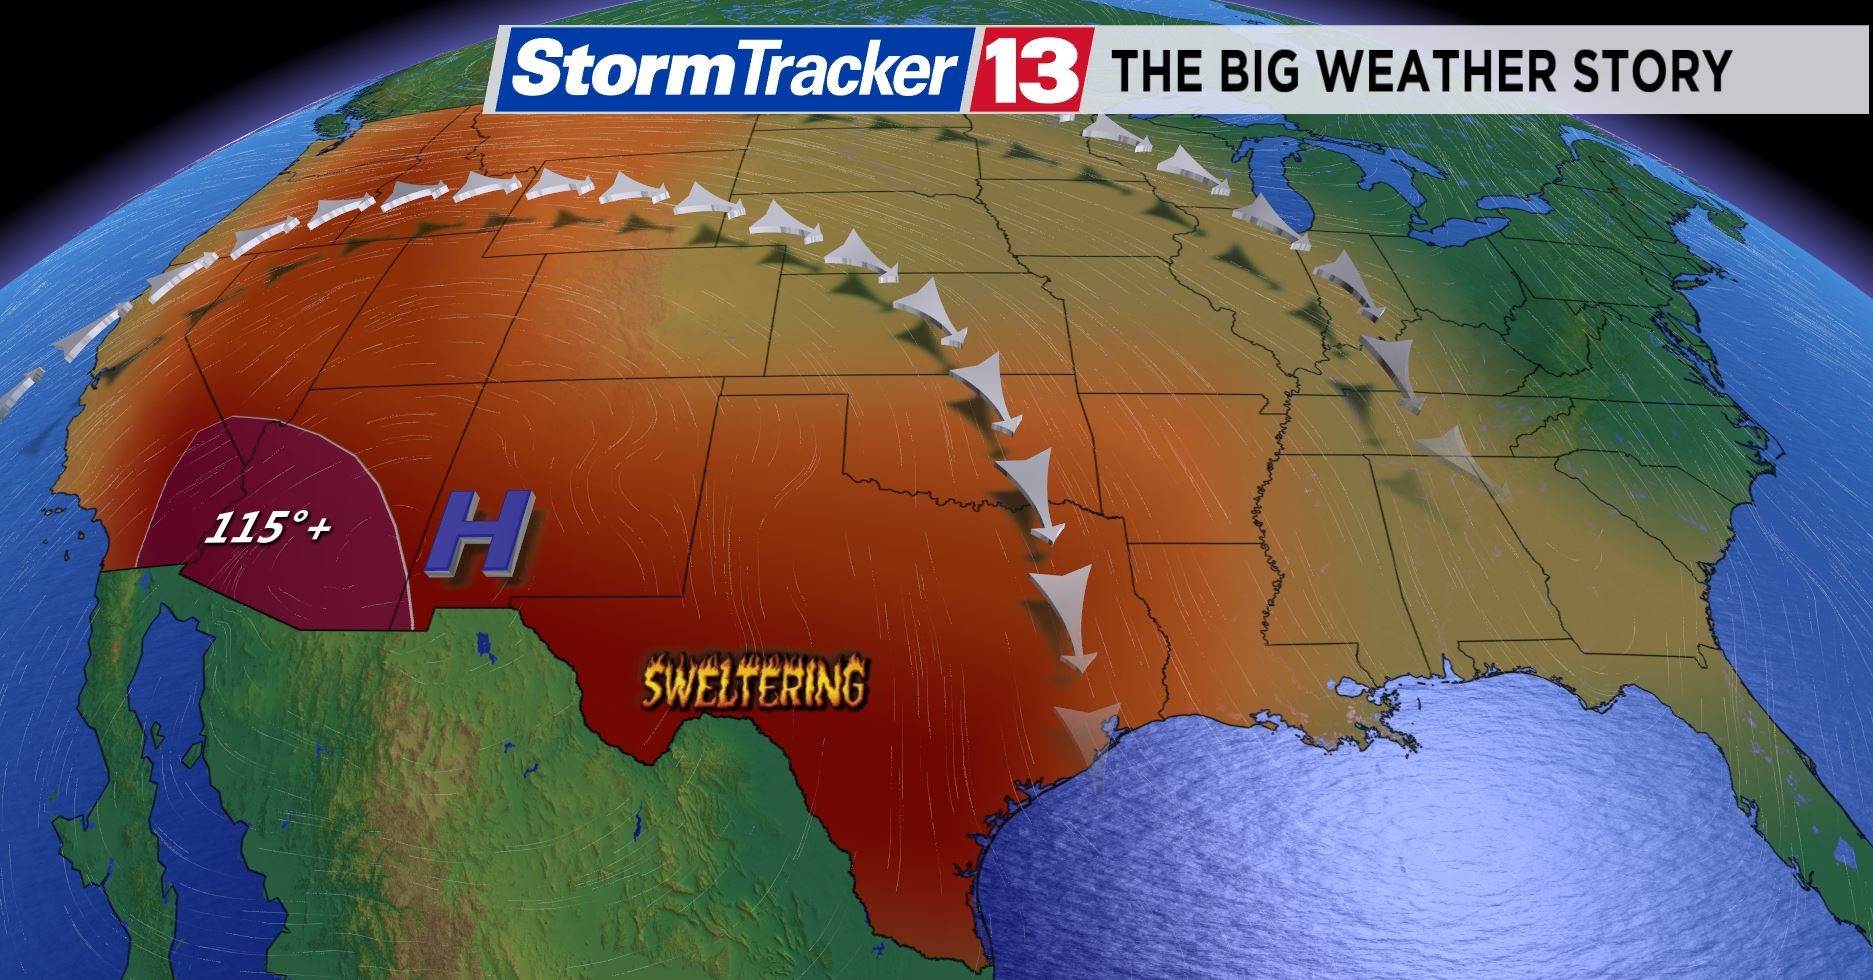 In order to balance this dip in the jet stream across the East Coast, there has been a huge ridge of high pressure along the West Coast. This high pressure system in the West has been responsible for Record Heat in Texas and in parts of the Southwestern U.S.  